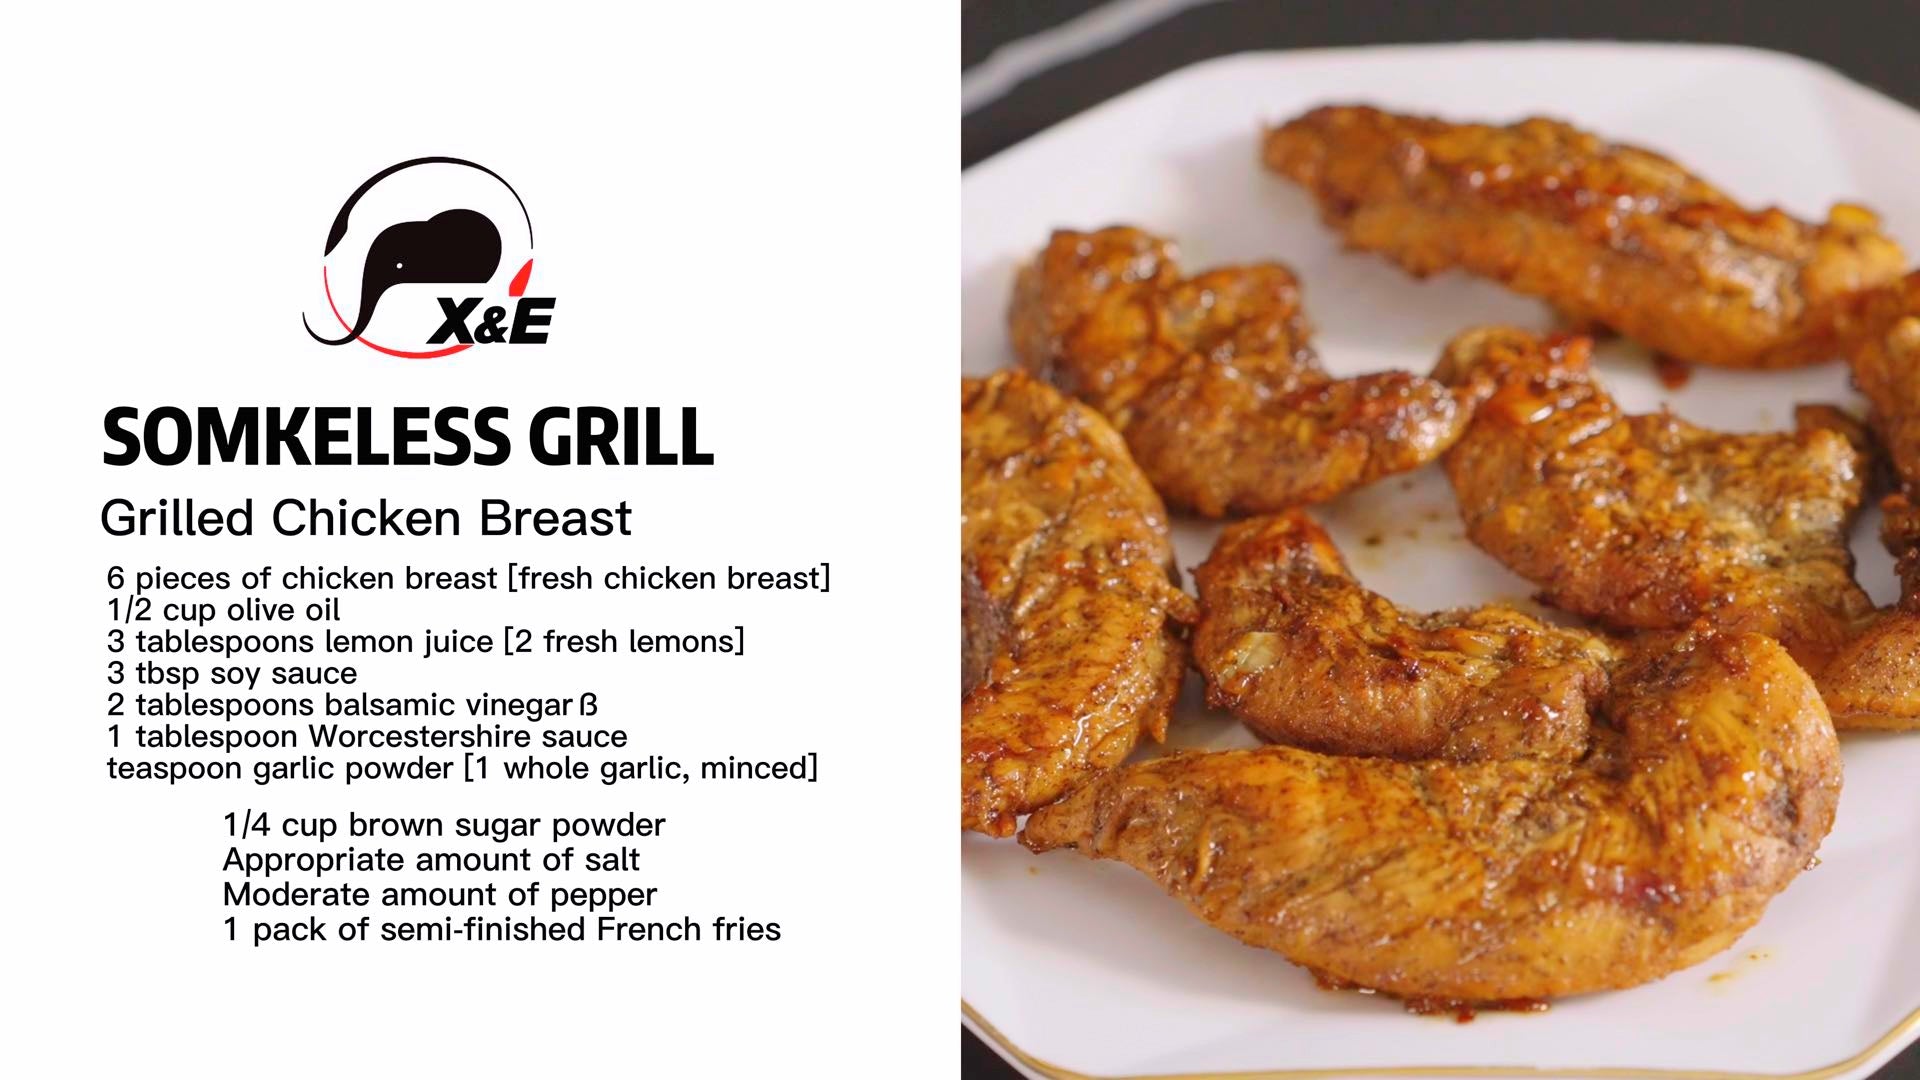 Wogoule grilled chicken breast X&E smokeless grill recipe